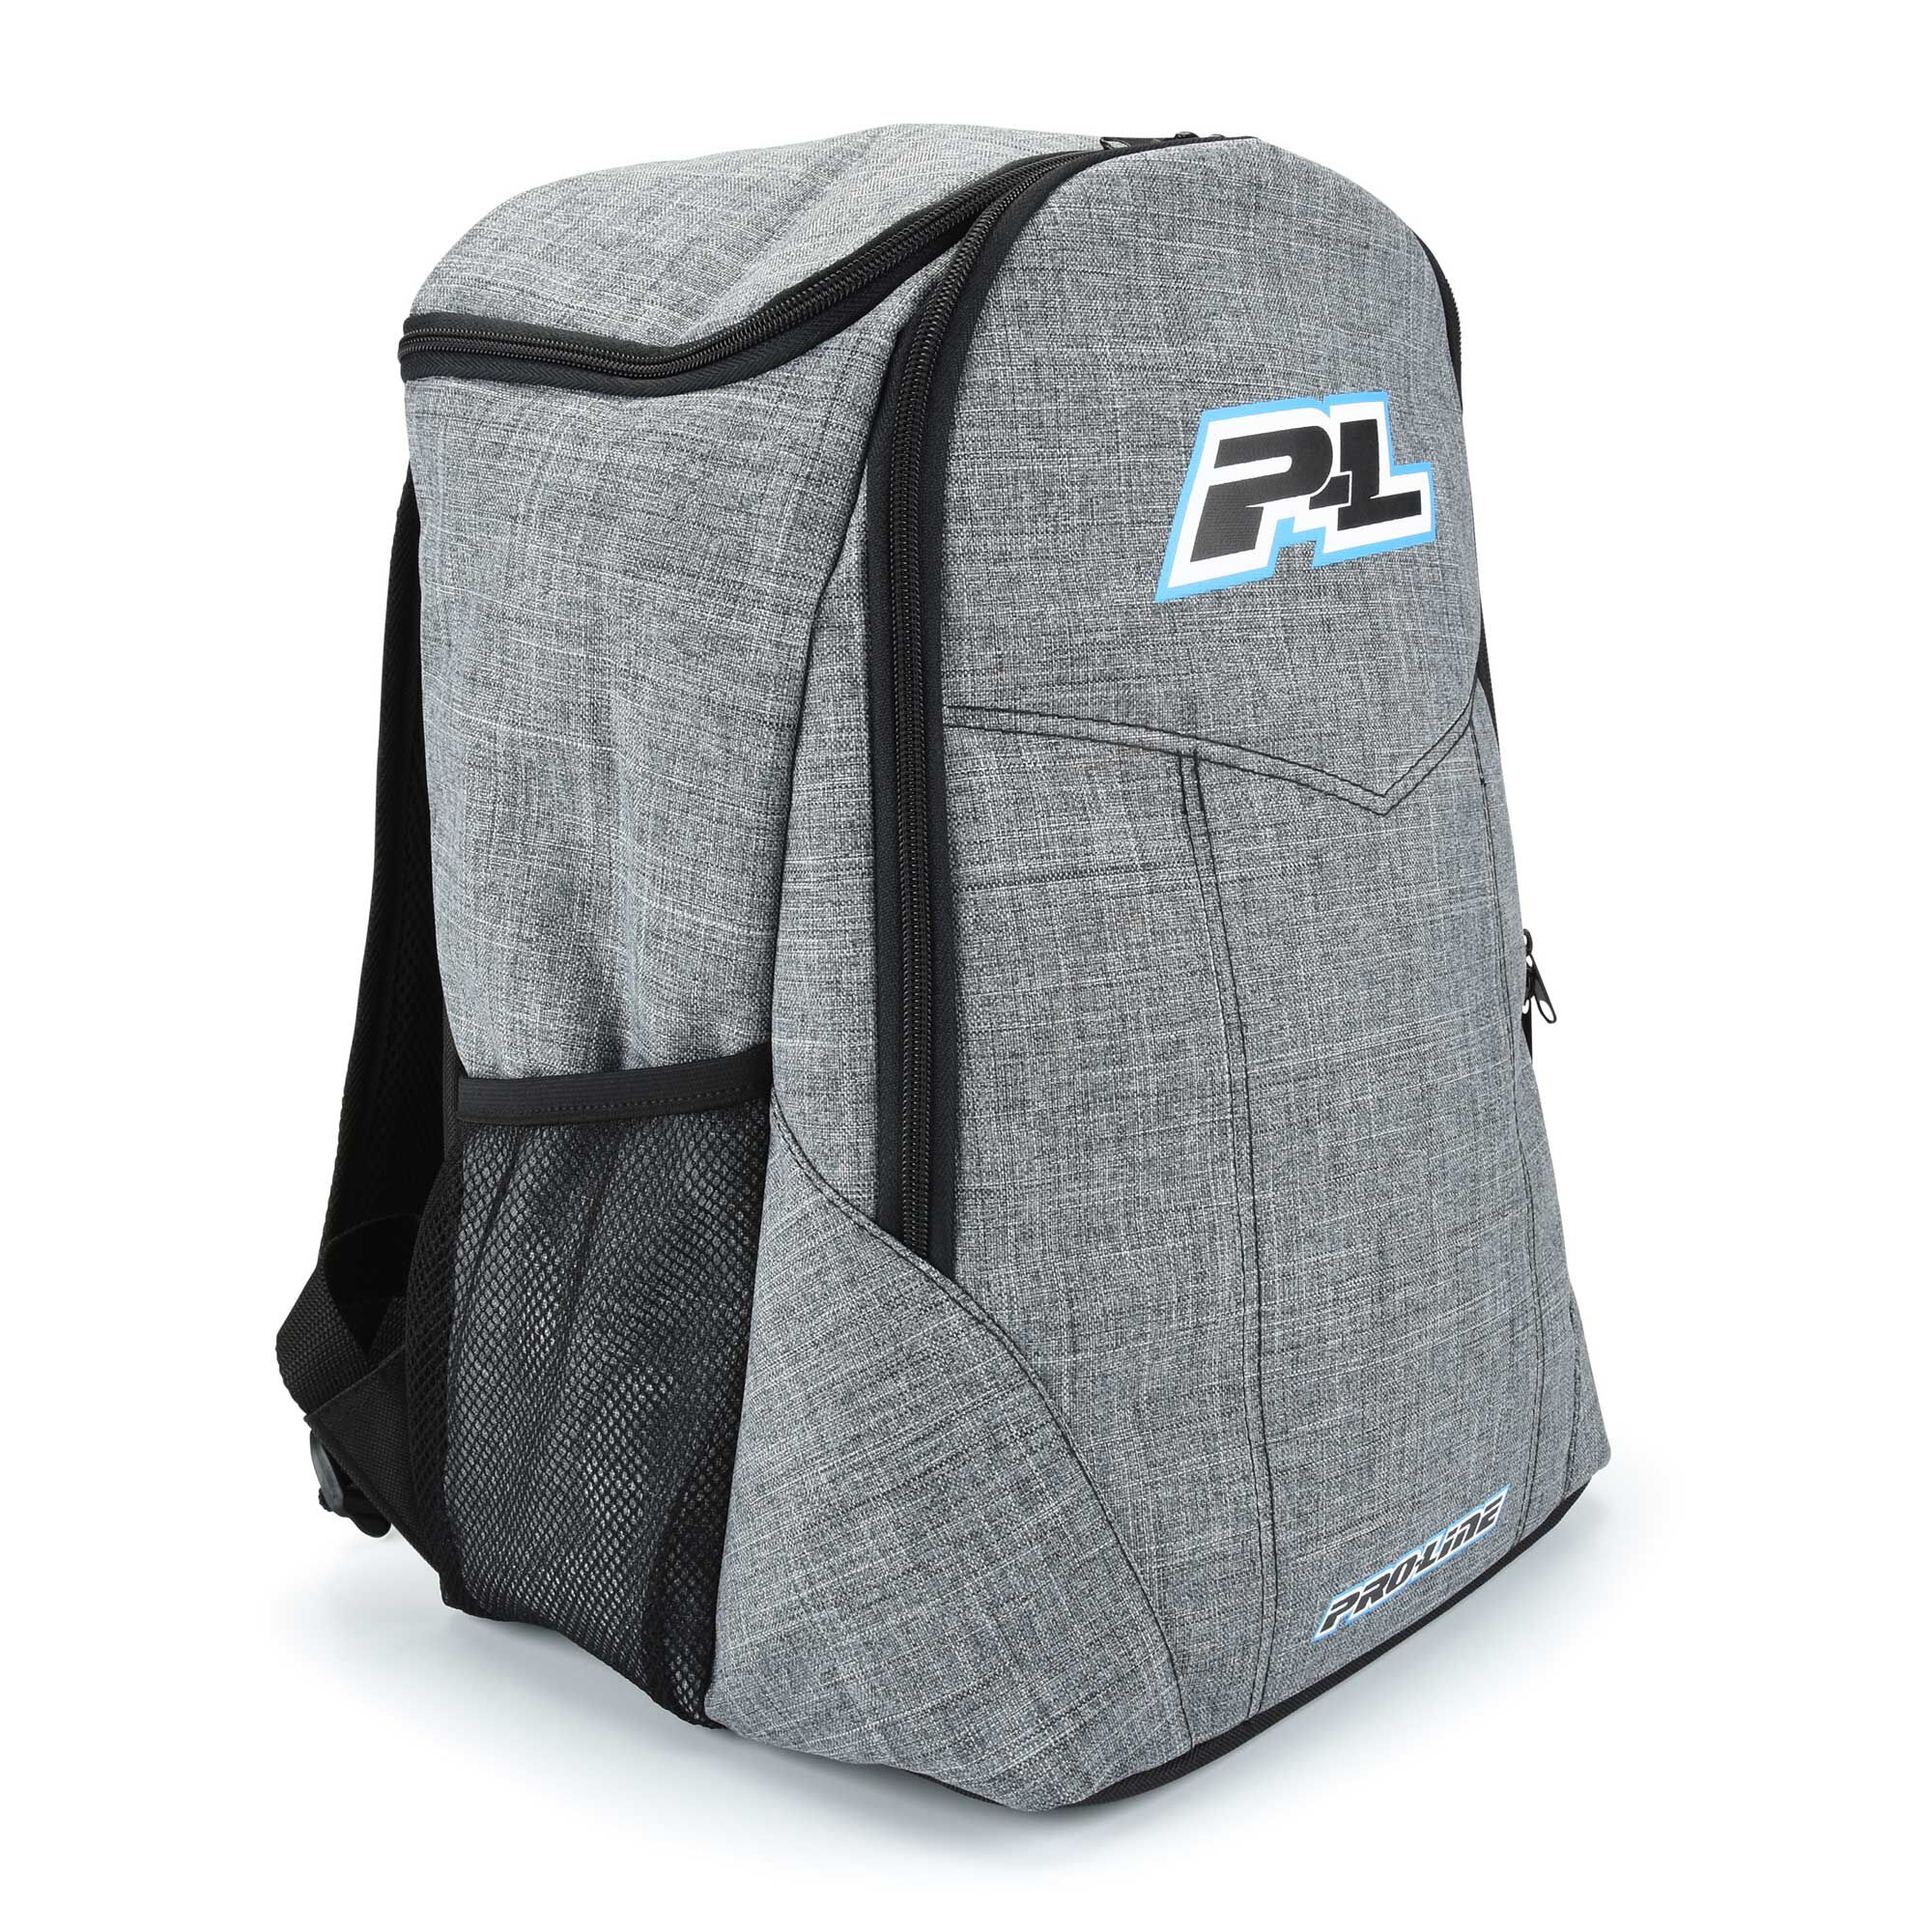 PROLINE Active Backpack for all Hobby Enthusiasts Pr9847-00 